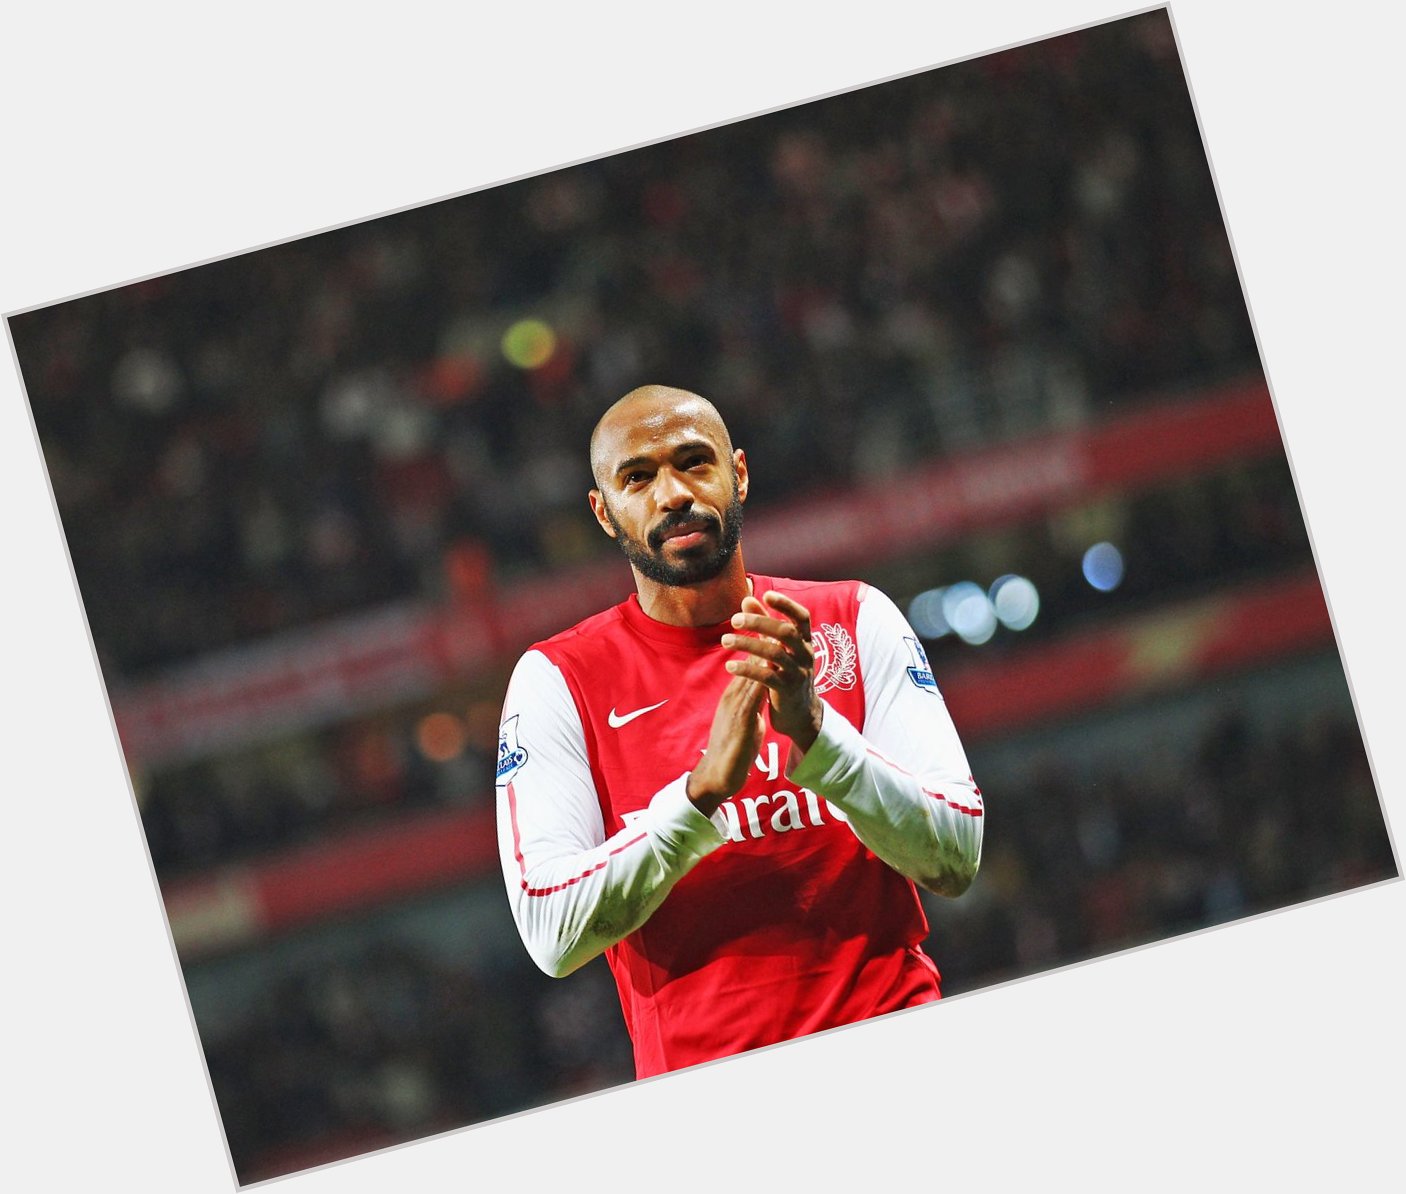 Happy birthday to Arsenal legend and Invincible Thierry Henry, who turns 41 today! afcstuff